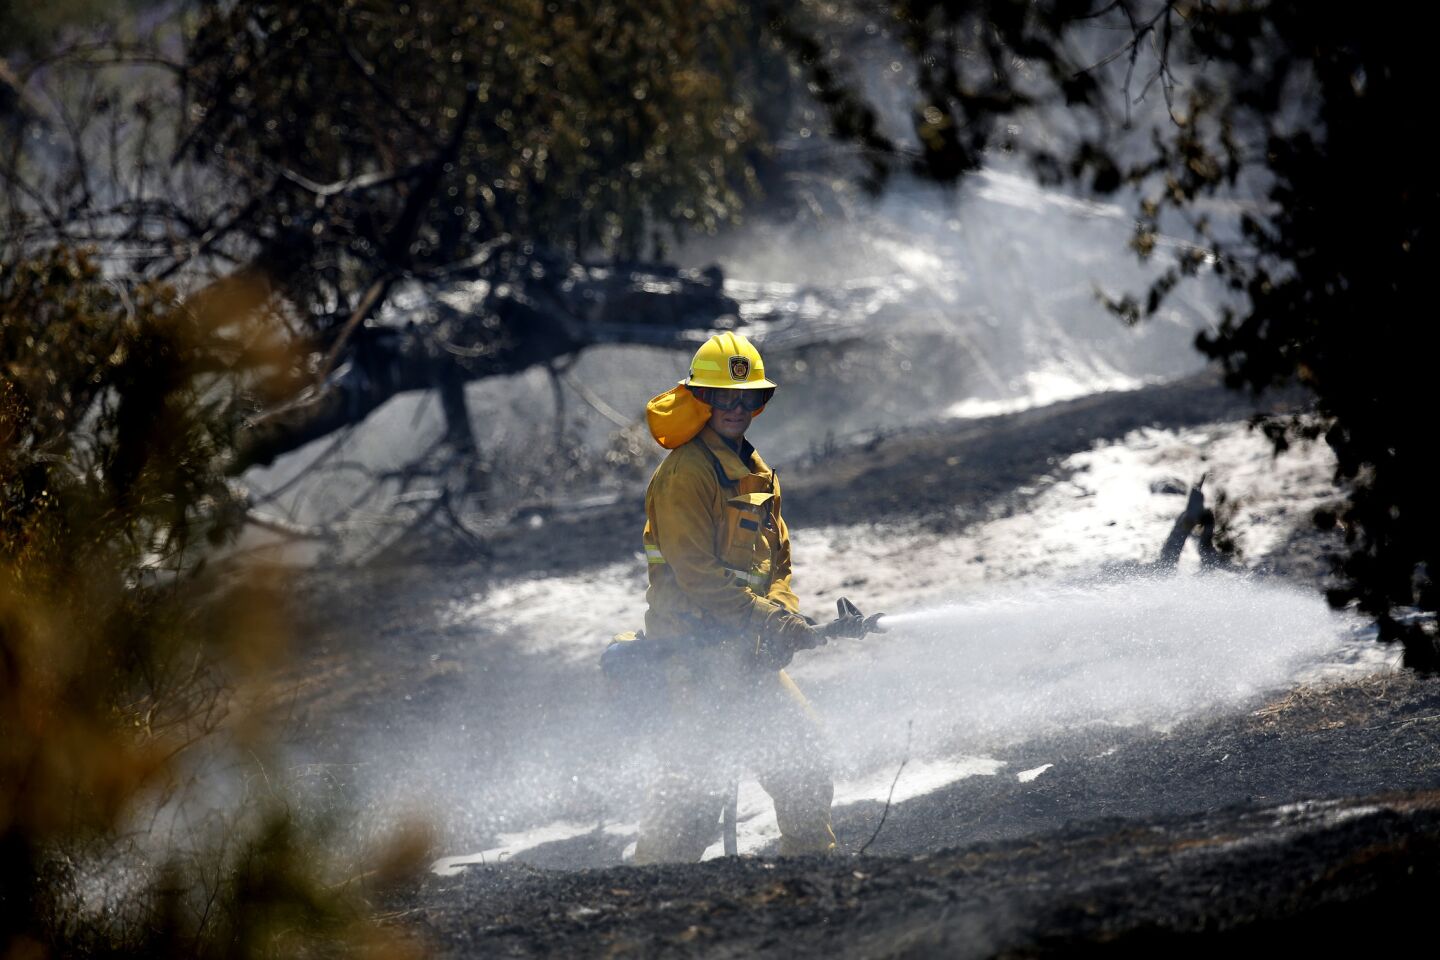 Firefighters extinguish a brush fire at Buena Vista Meadow in Elysian Park in Los Angeles.